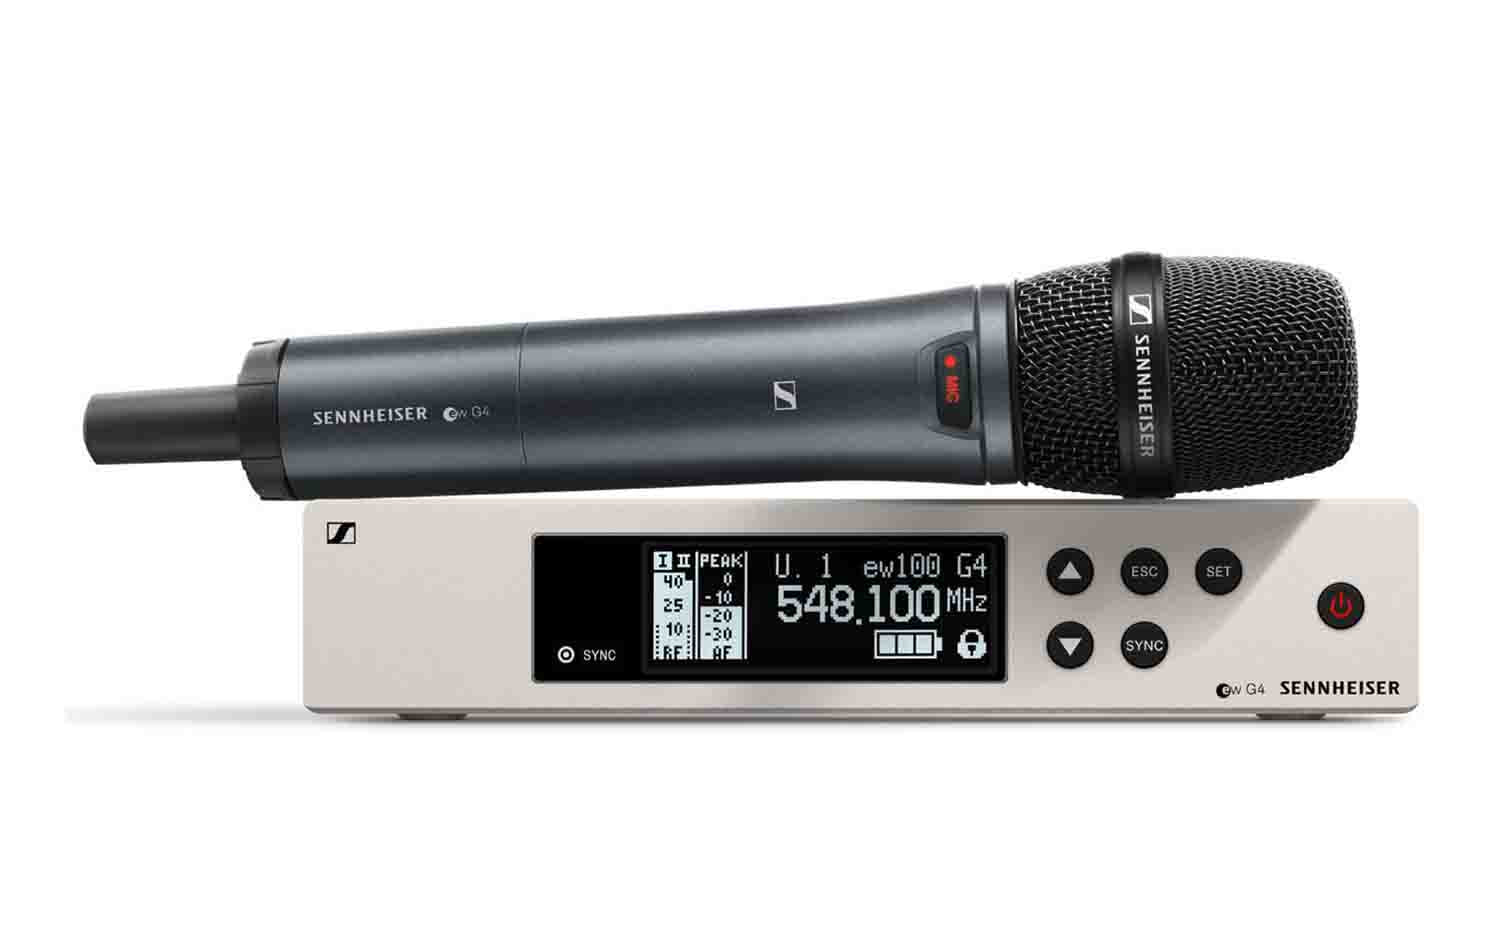 Sennheiser EW 100 G4-935-S-A Wireless Handheld Microphone System with MMD 935 Capsule - 516 to 558 MHz - Hollywood DJ